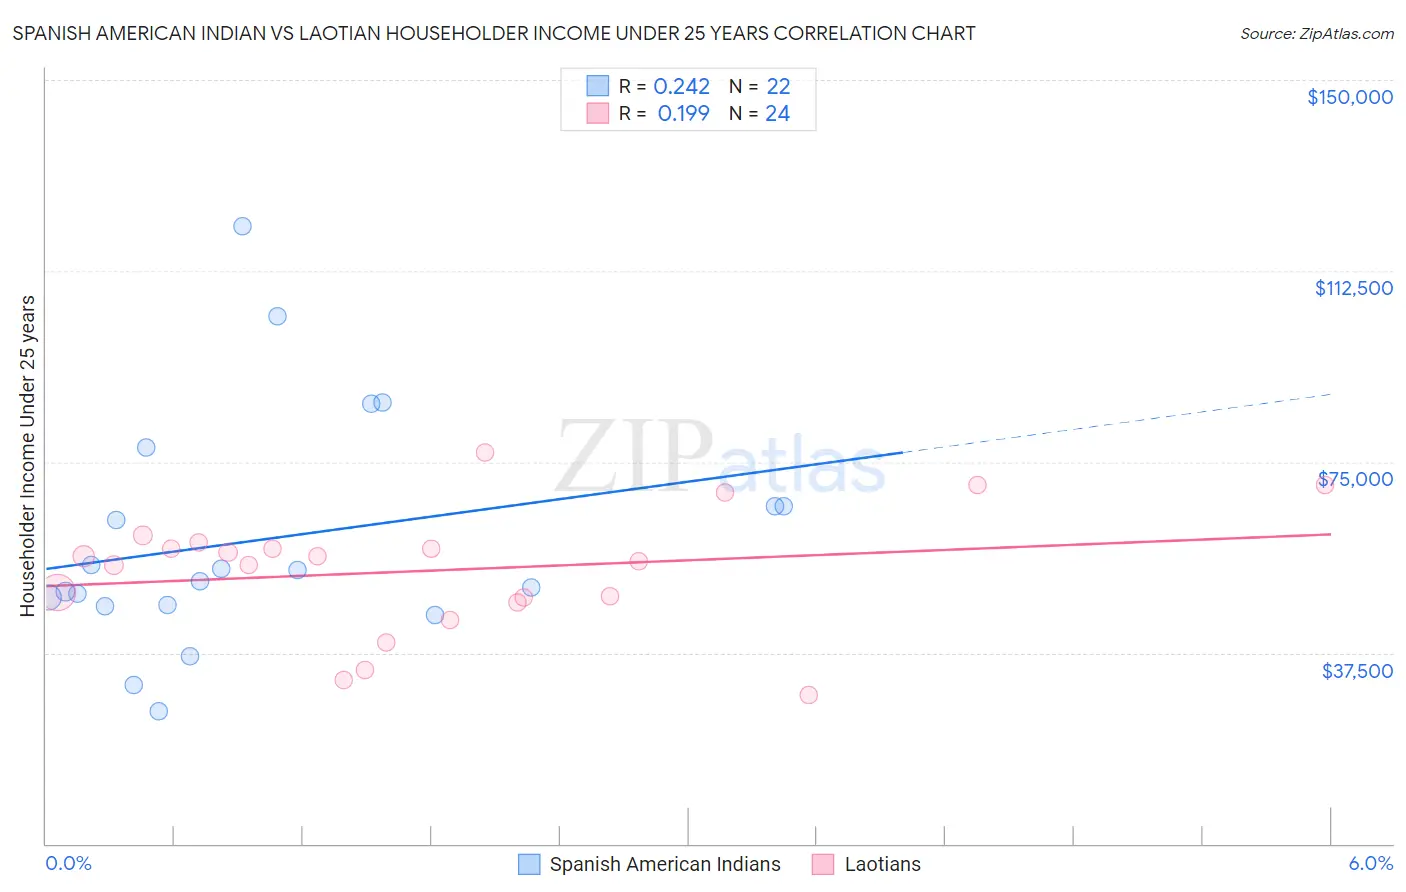 Spanish American Indian vs Laotian Householder Income Under 25 years